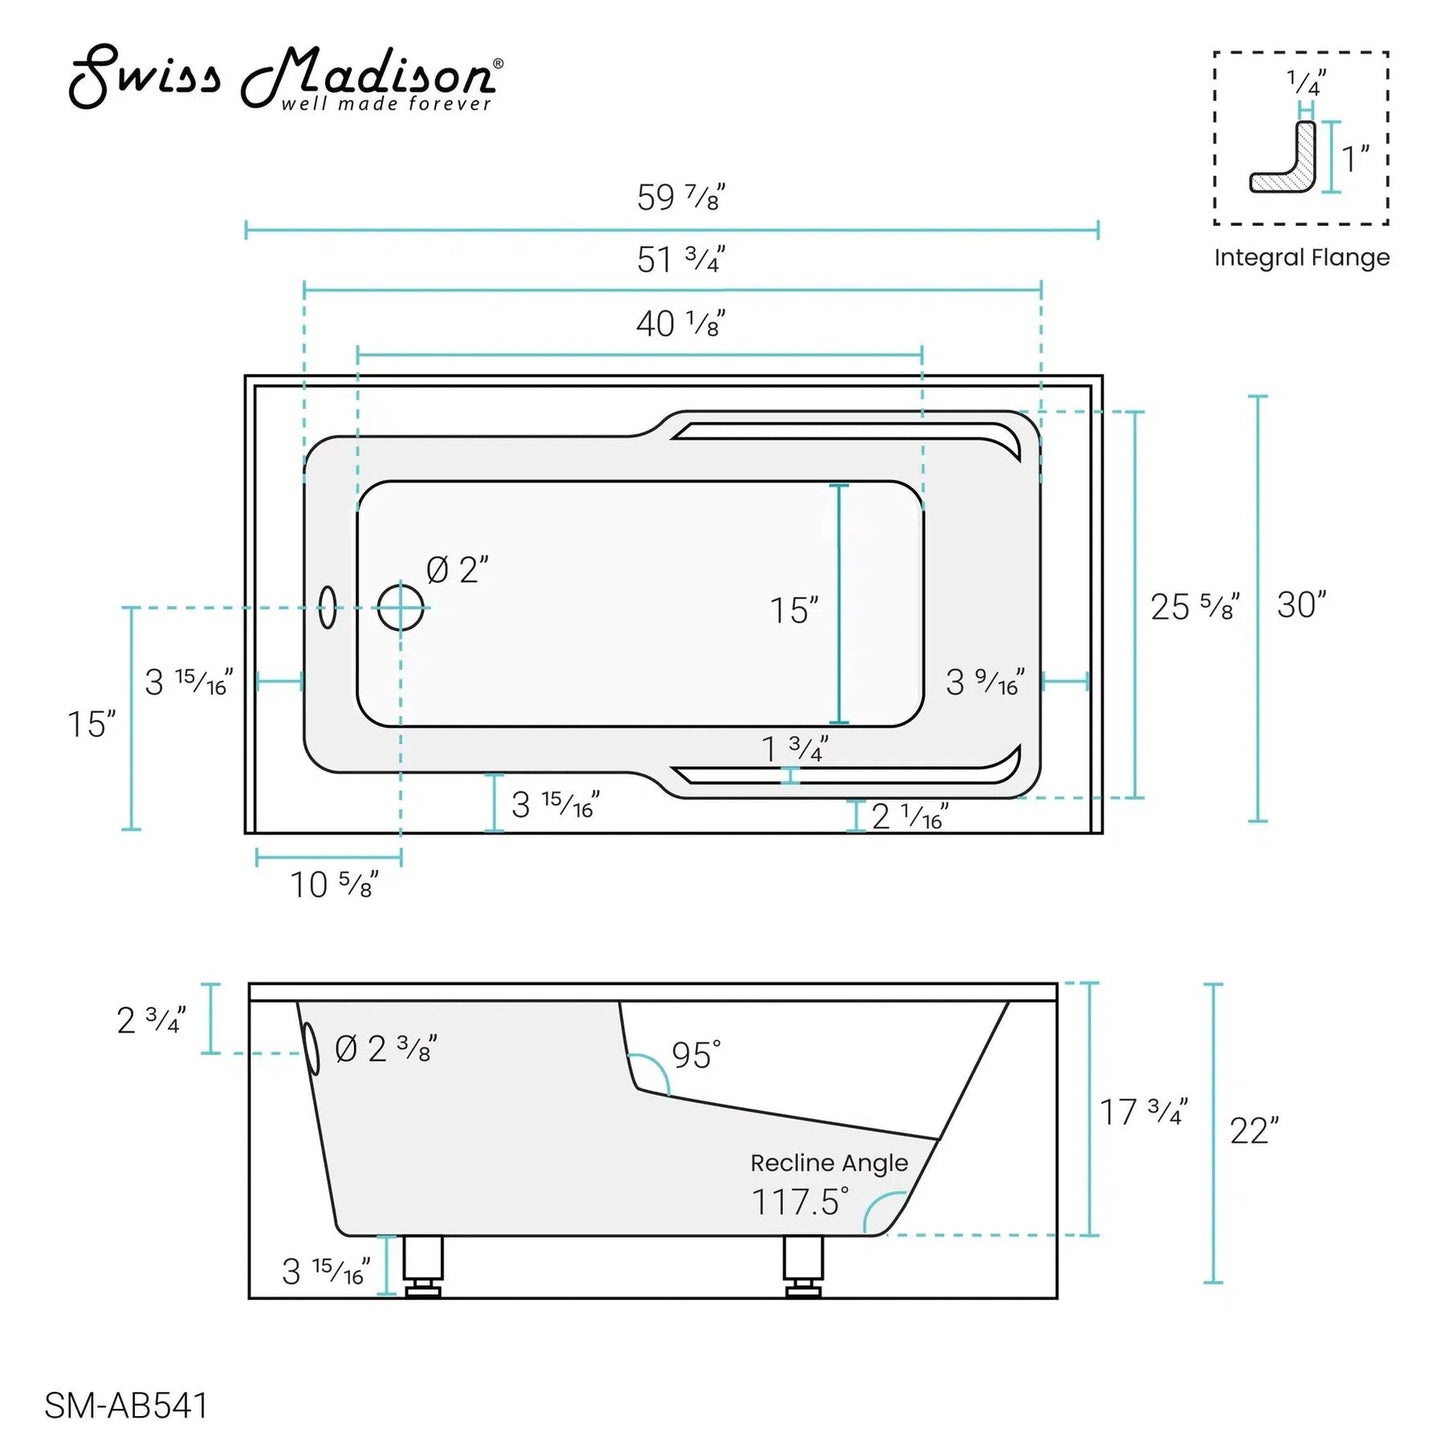 Swiss Madison Voltaire 60" x 30" Glossy White Left-Hand Drain Alcove Bathtub With Integrated Armrest and Built-In Flange & Apron Front